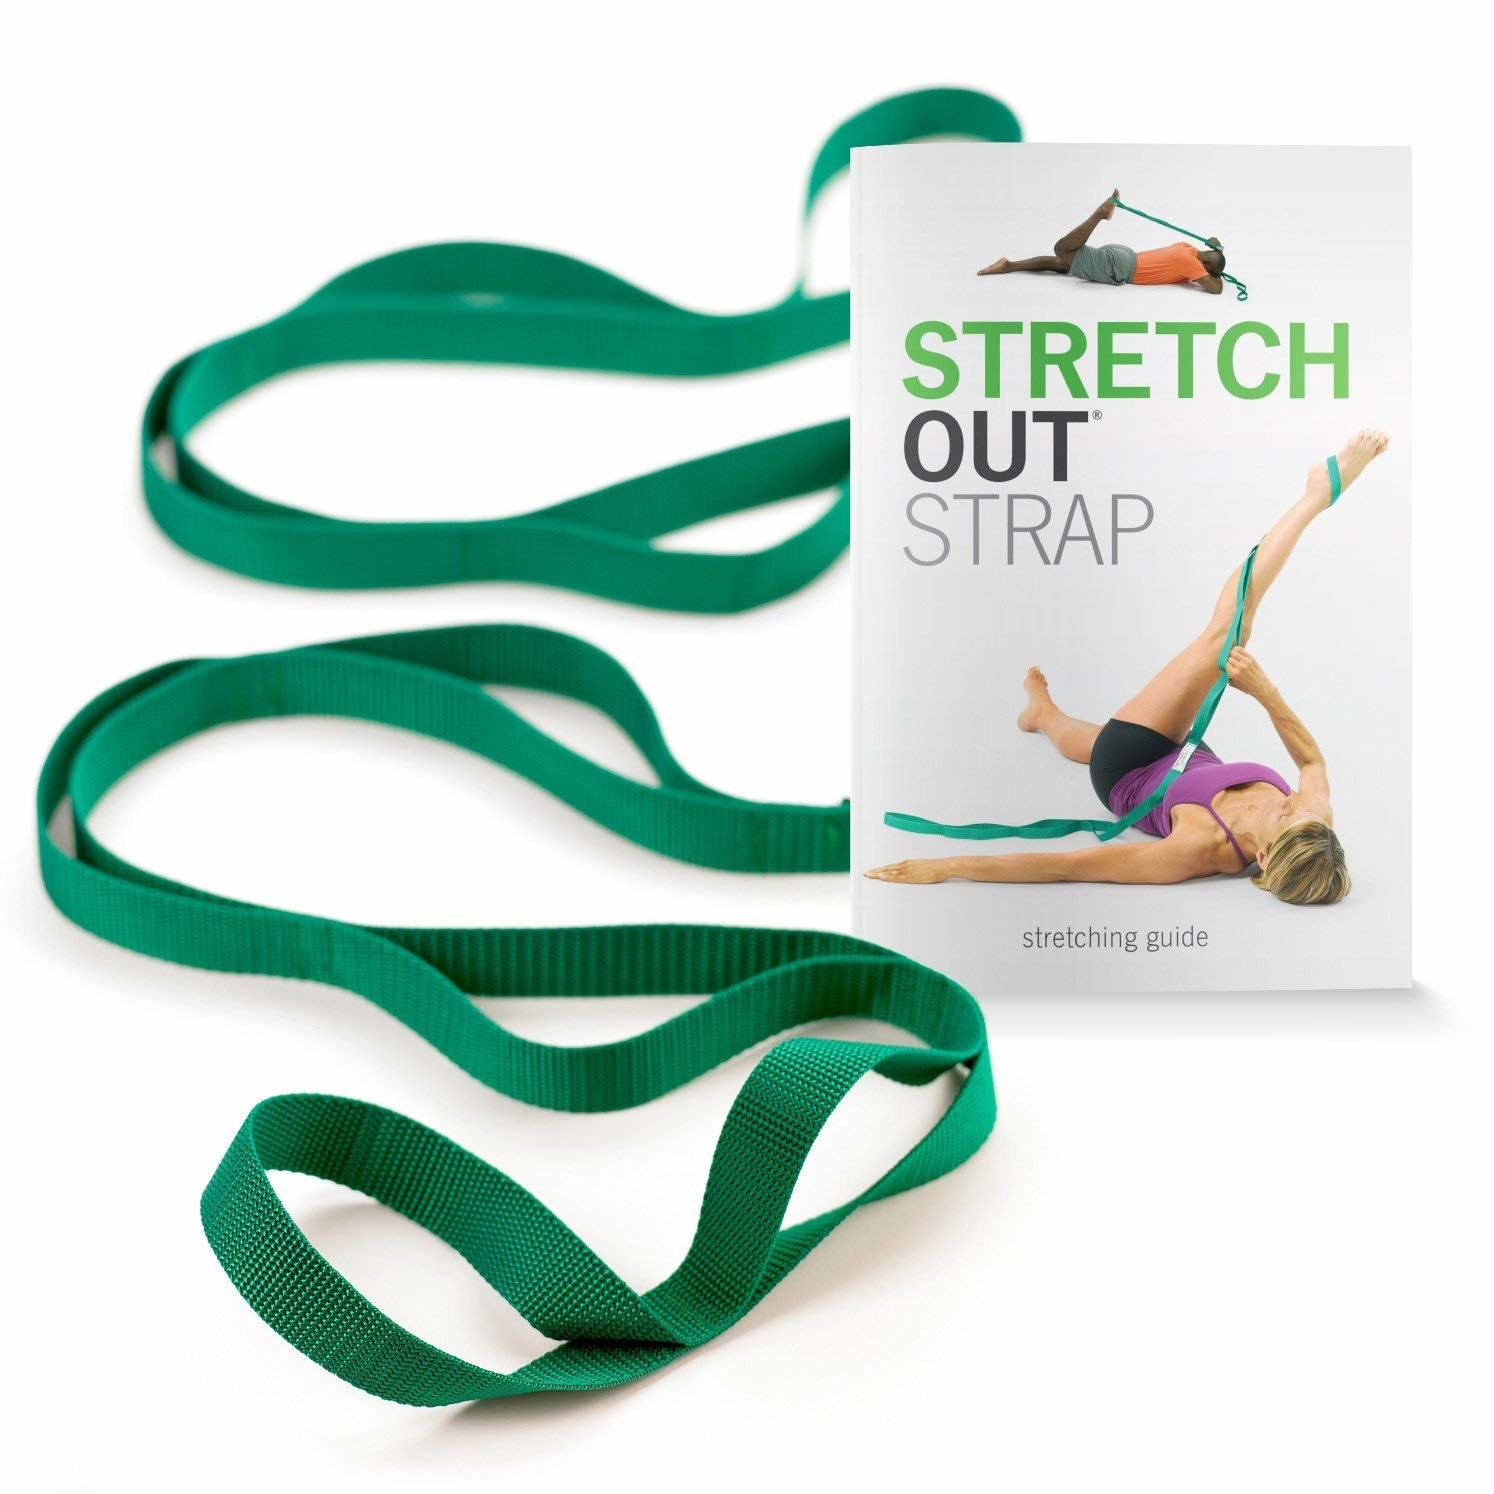 26 Gifts to Take Their Workout to the Next Level